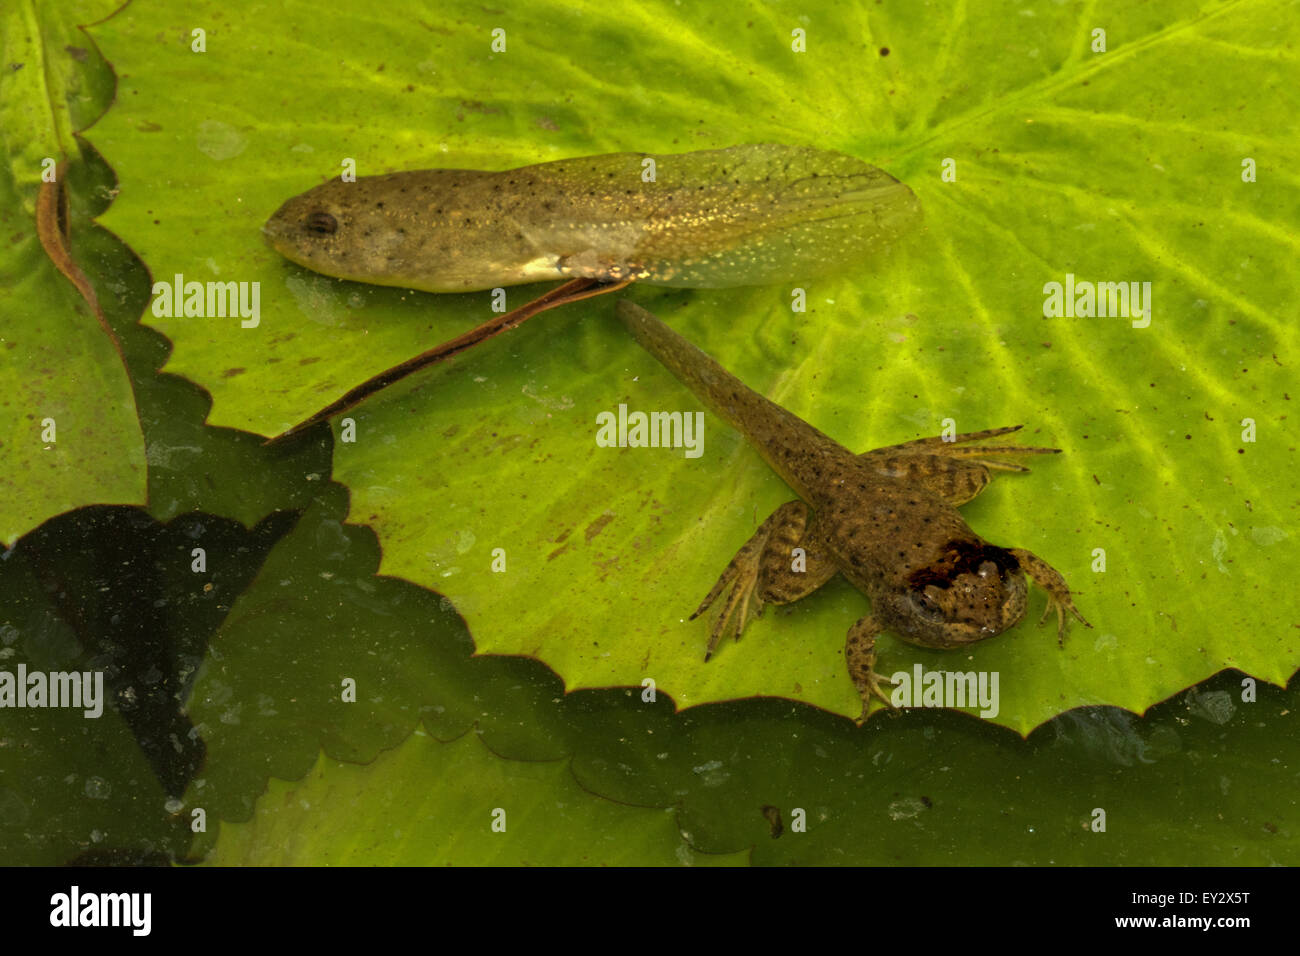 American bullfrog (Lithobates catesbeianus), tadpoles at two stages, Washington, District of Columbia Stock Photo